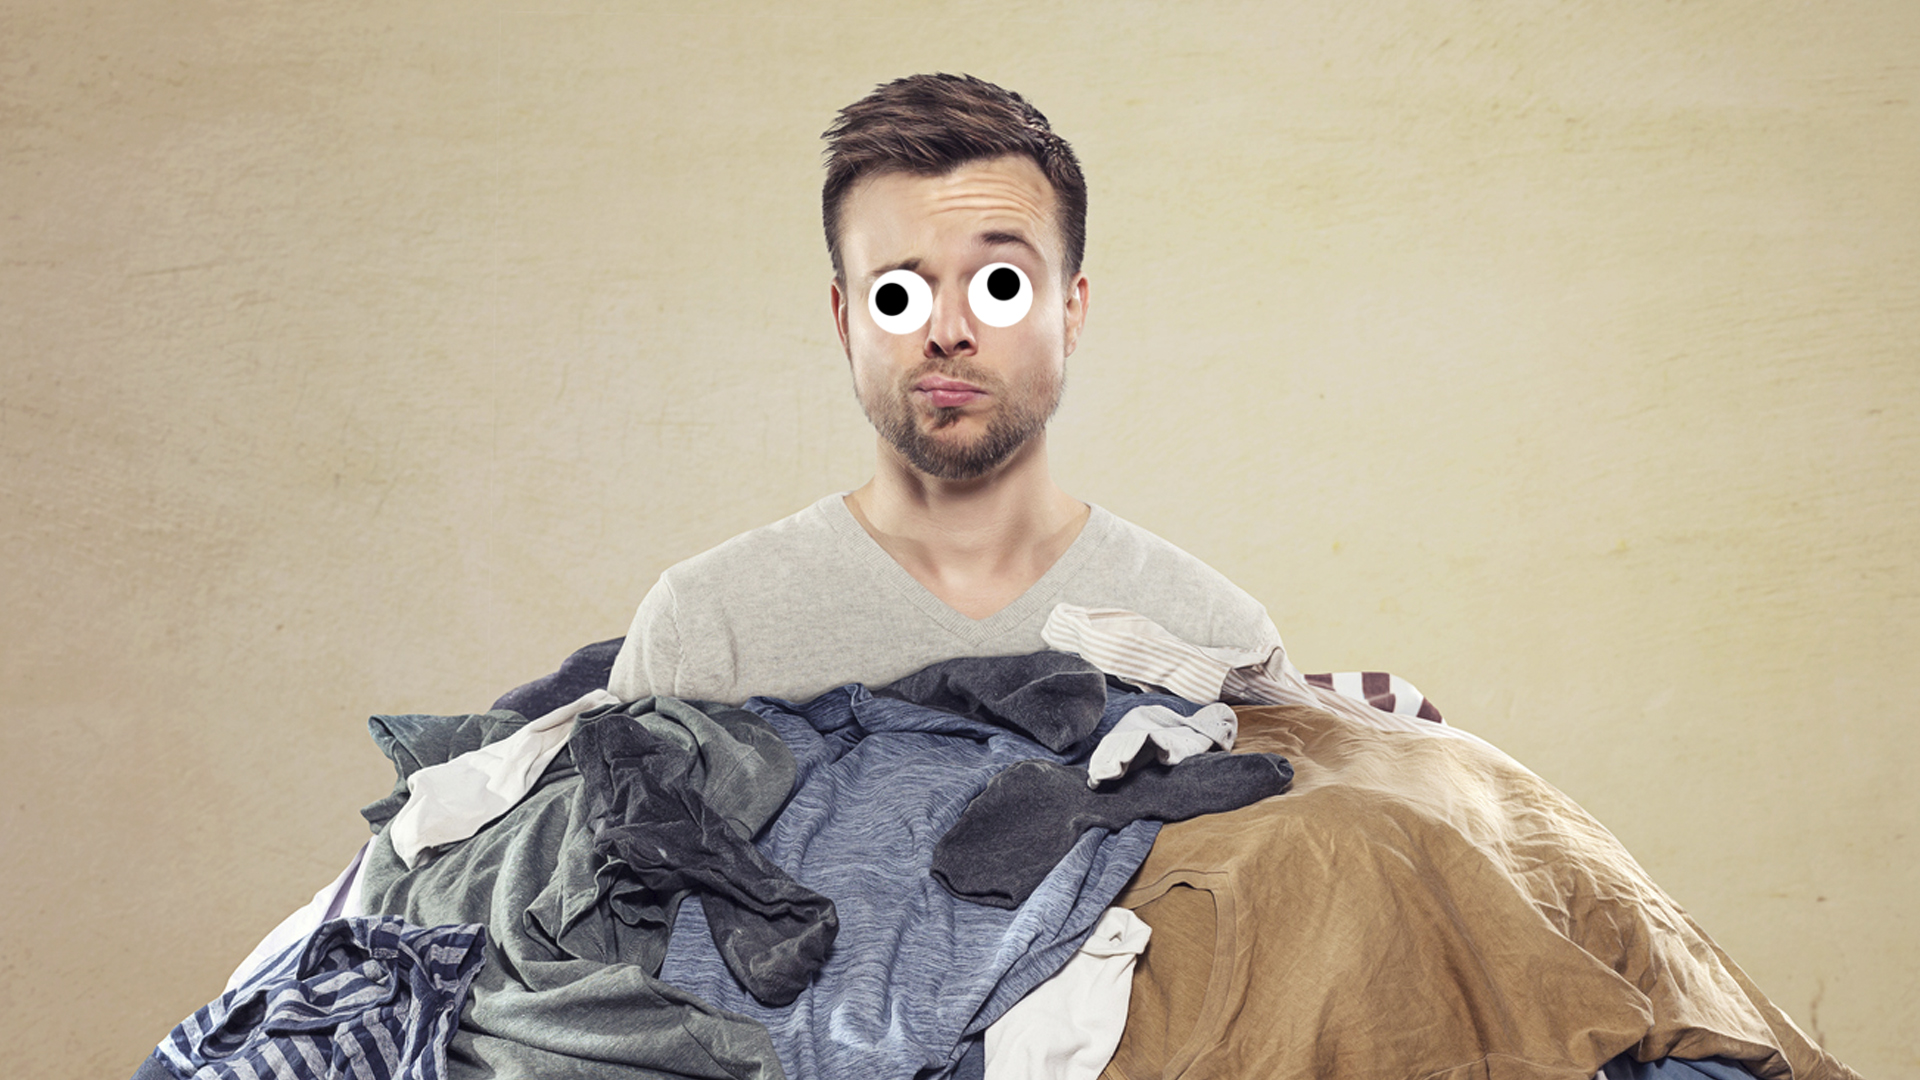 A man surrounded by laundry